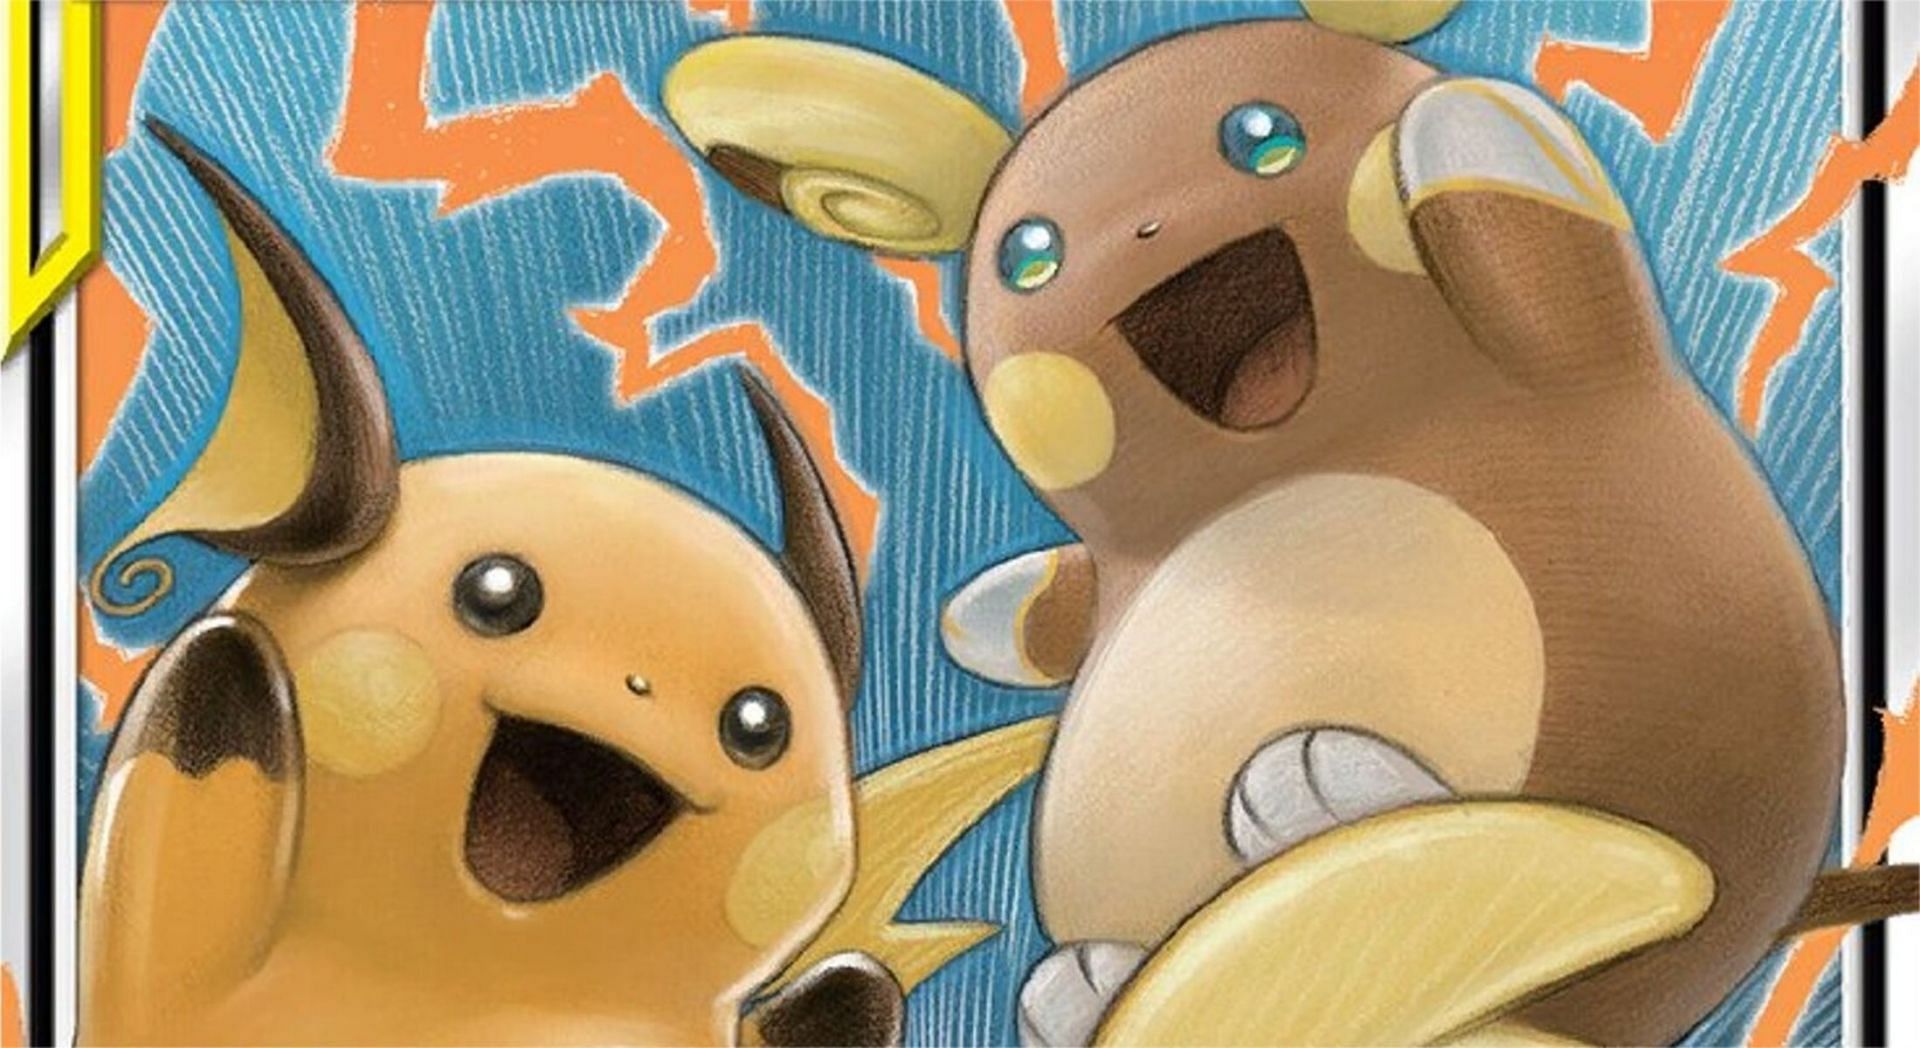 Raichu and its Alolan counterpart as seen in the Pokemon Trading Card Game (Image via The Pokemon Company)